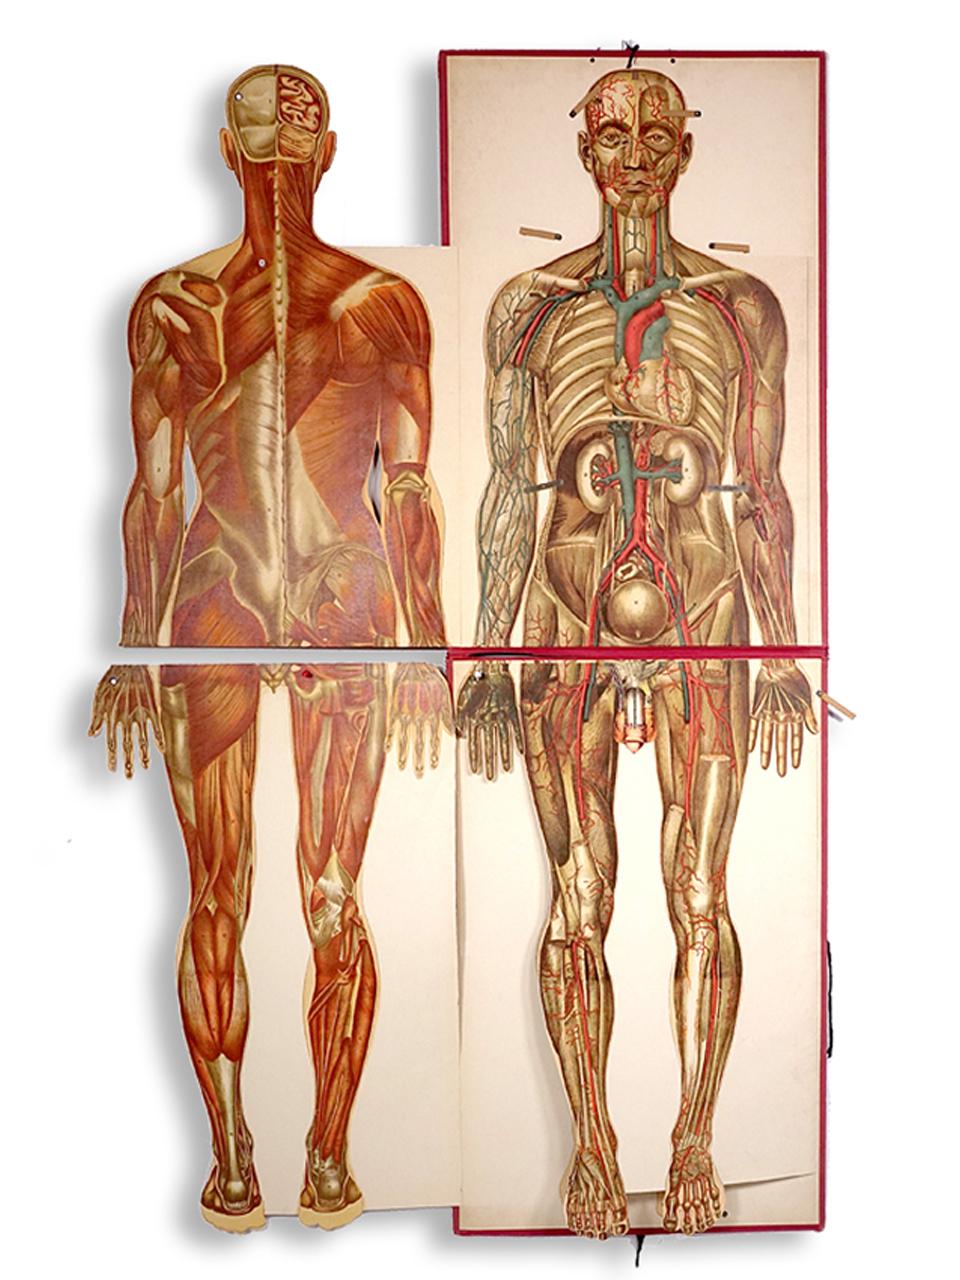 Pilz anatomical flap manikin was produced by The American Thermo-Ware Co. of NY.
This is a life-size paper manikin that that could be viewed in layers to demonstrate deeper sections of the body, sold as a matching set.